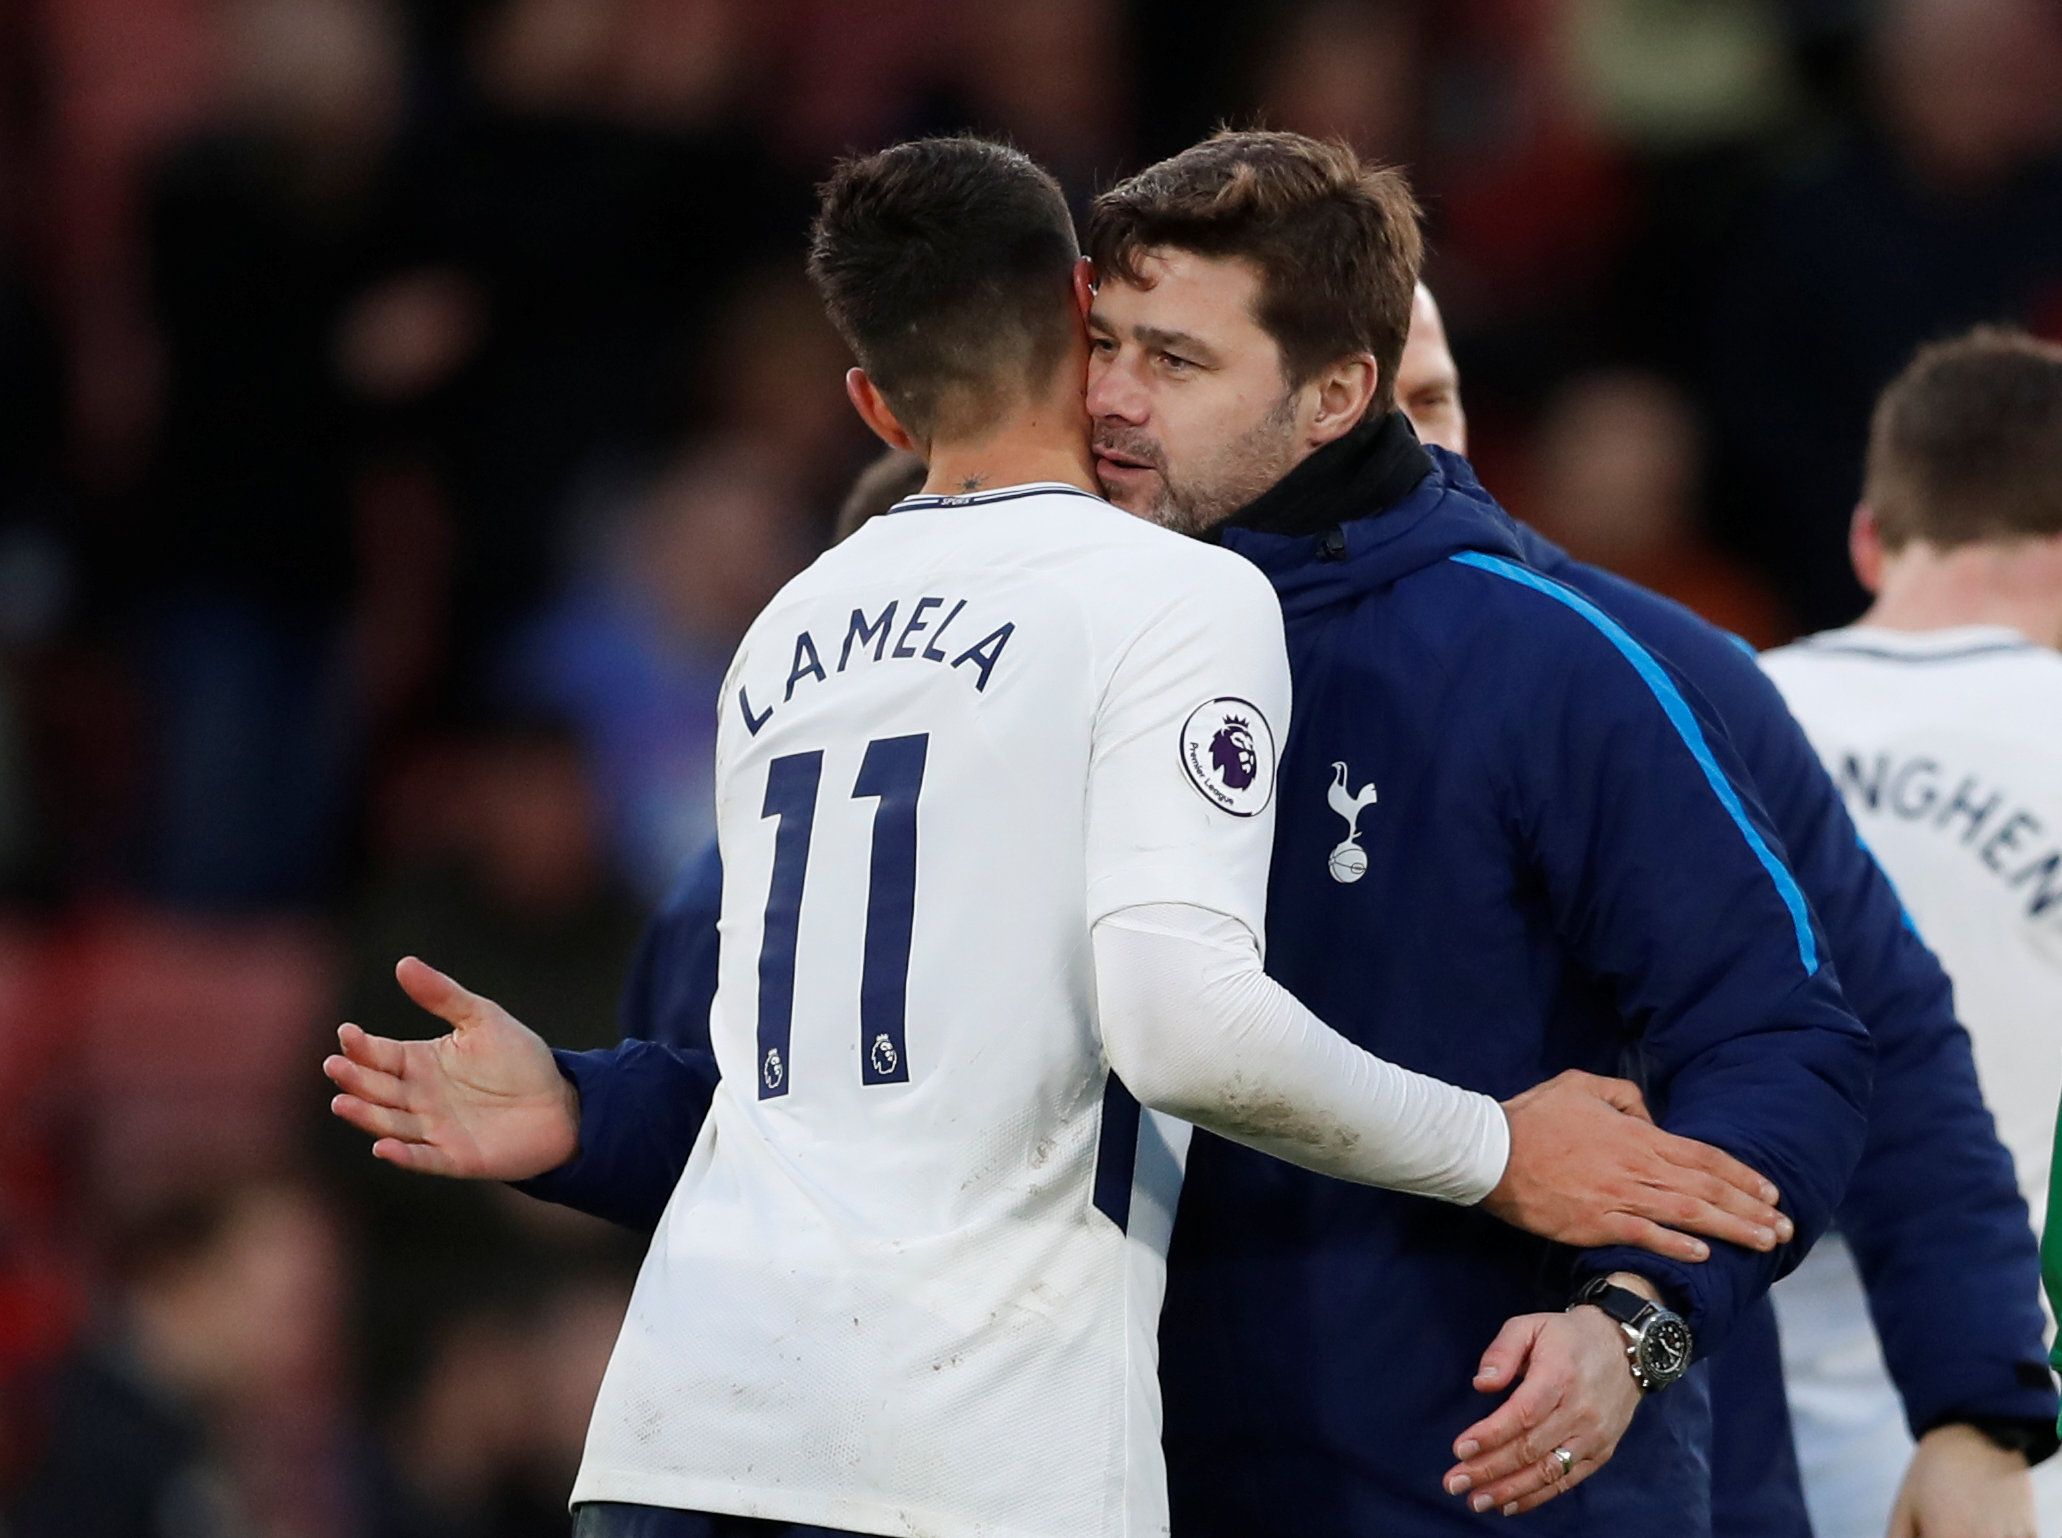 Soccer Football - Premier League - AFC Bournemouth vs Tottenham Hotspur - Vitality Stadium, Bournemouth, Britain - March 11, 2018   Tottenham manager Mauricio Pochettino celebrates after the match with Erik Lamela    Action Images via Reuters/Matthew Childs    EDITORIAL USE ONLY. No use with unauthorized audio, video, data, fixture lists, club/league logos or 